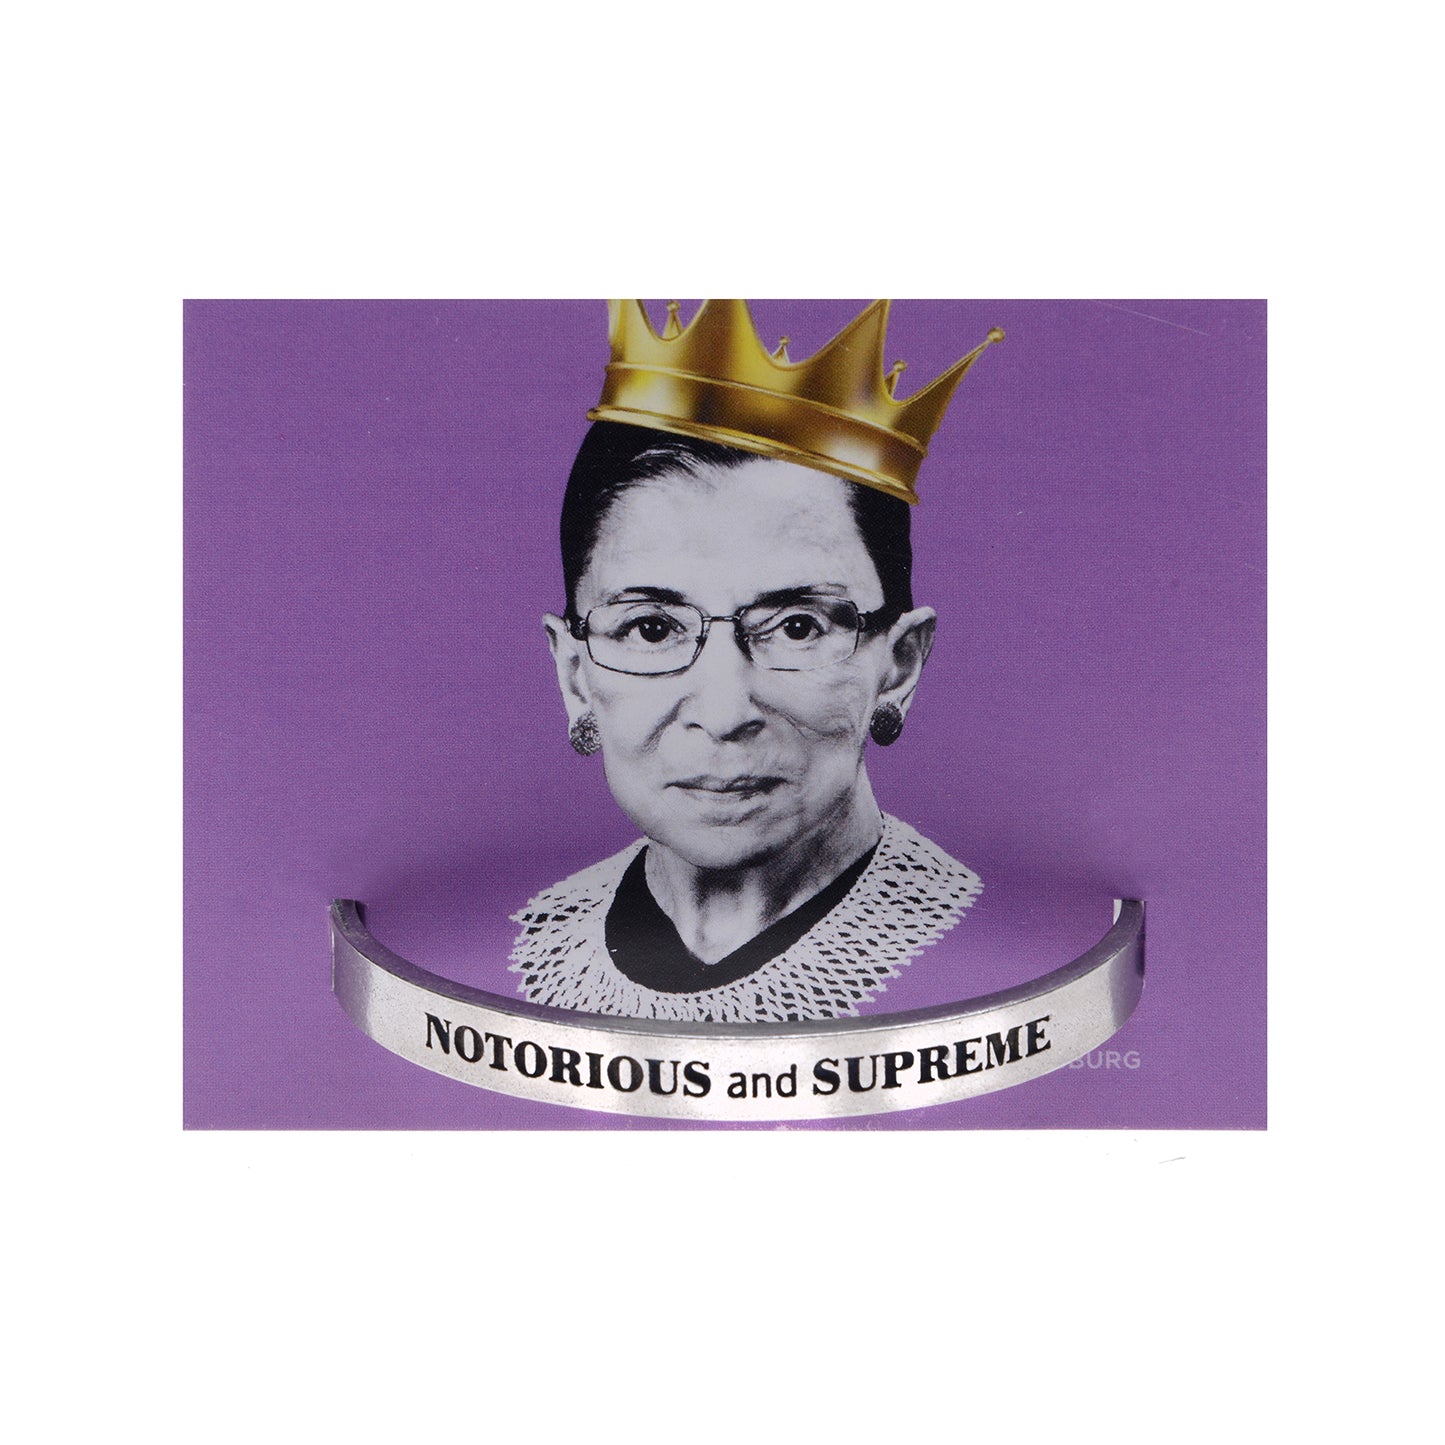 Notorious and Supreme Quotable Cuff Bracelet - Ruth Bader Ginsburg on backer card